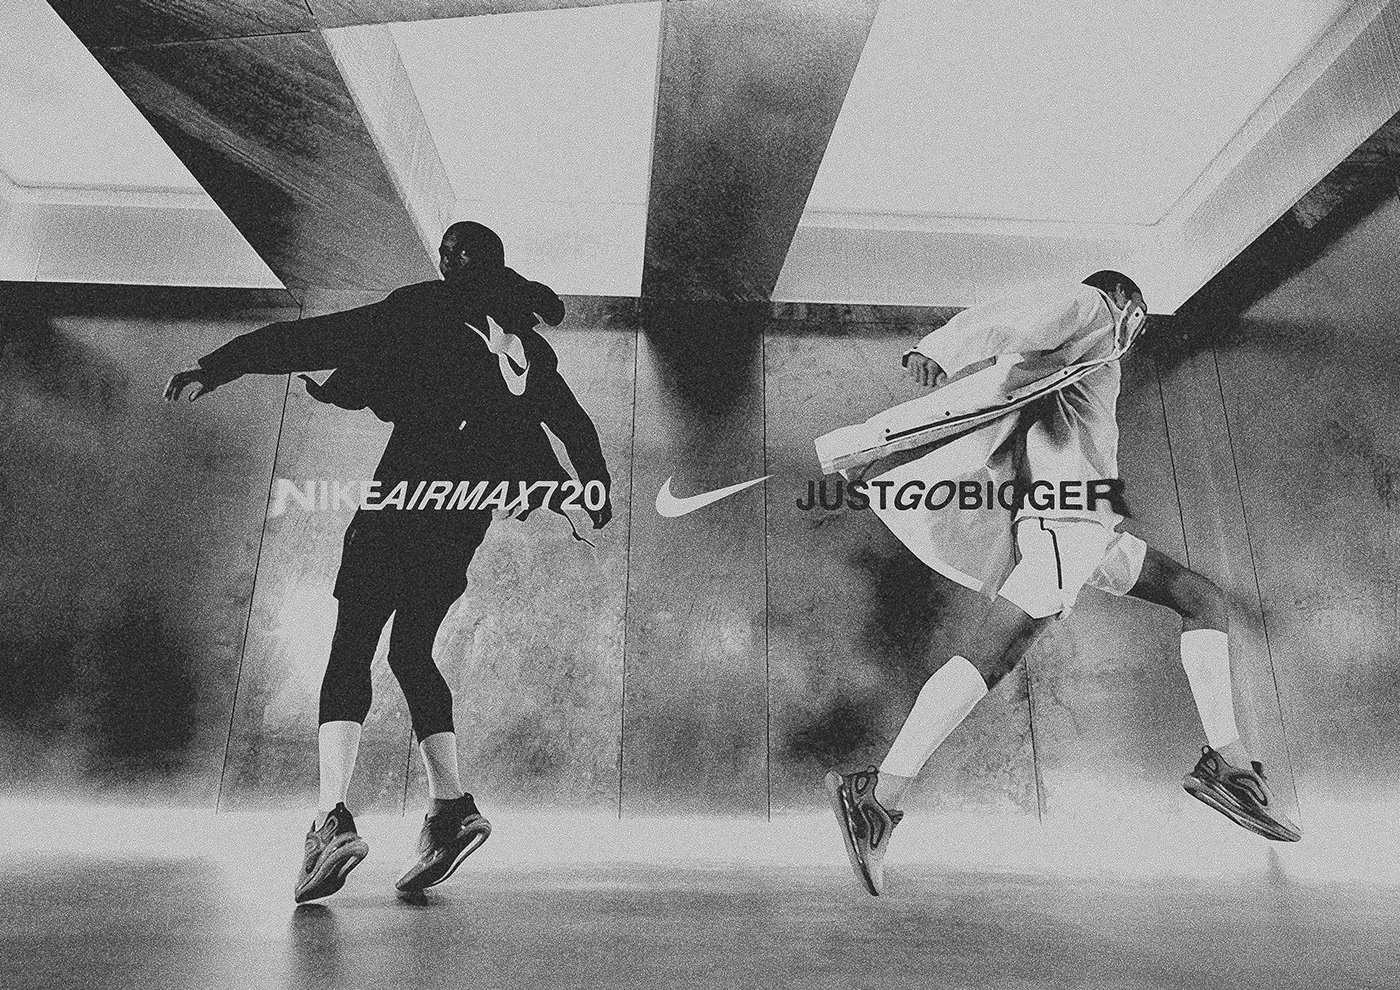 nike style guide